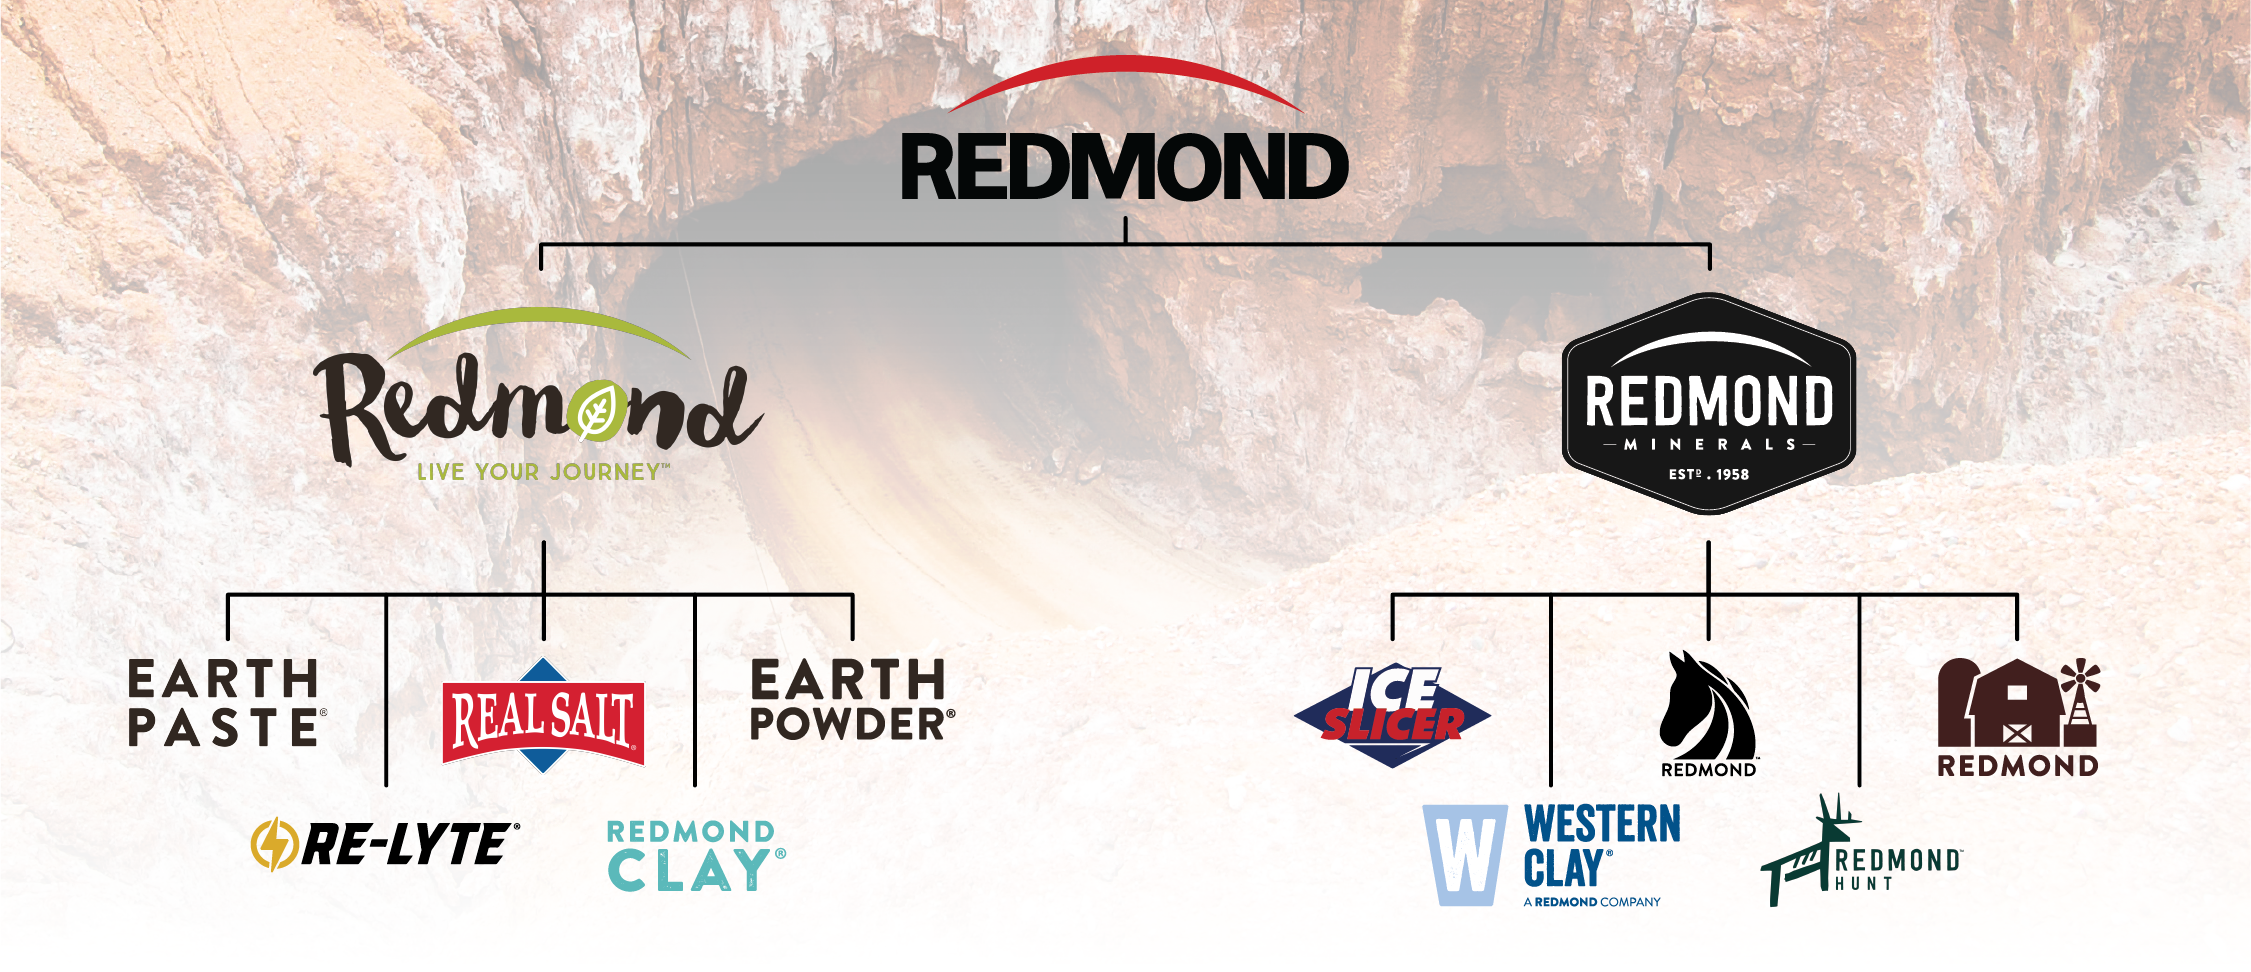 Redmond family of products